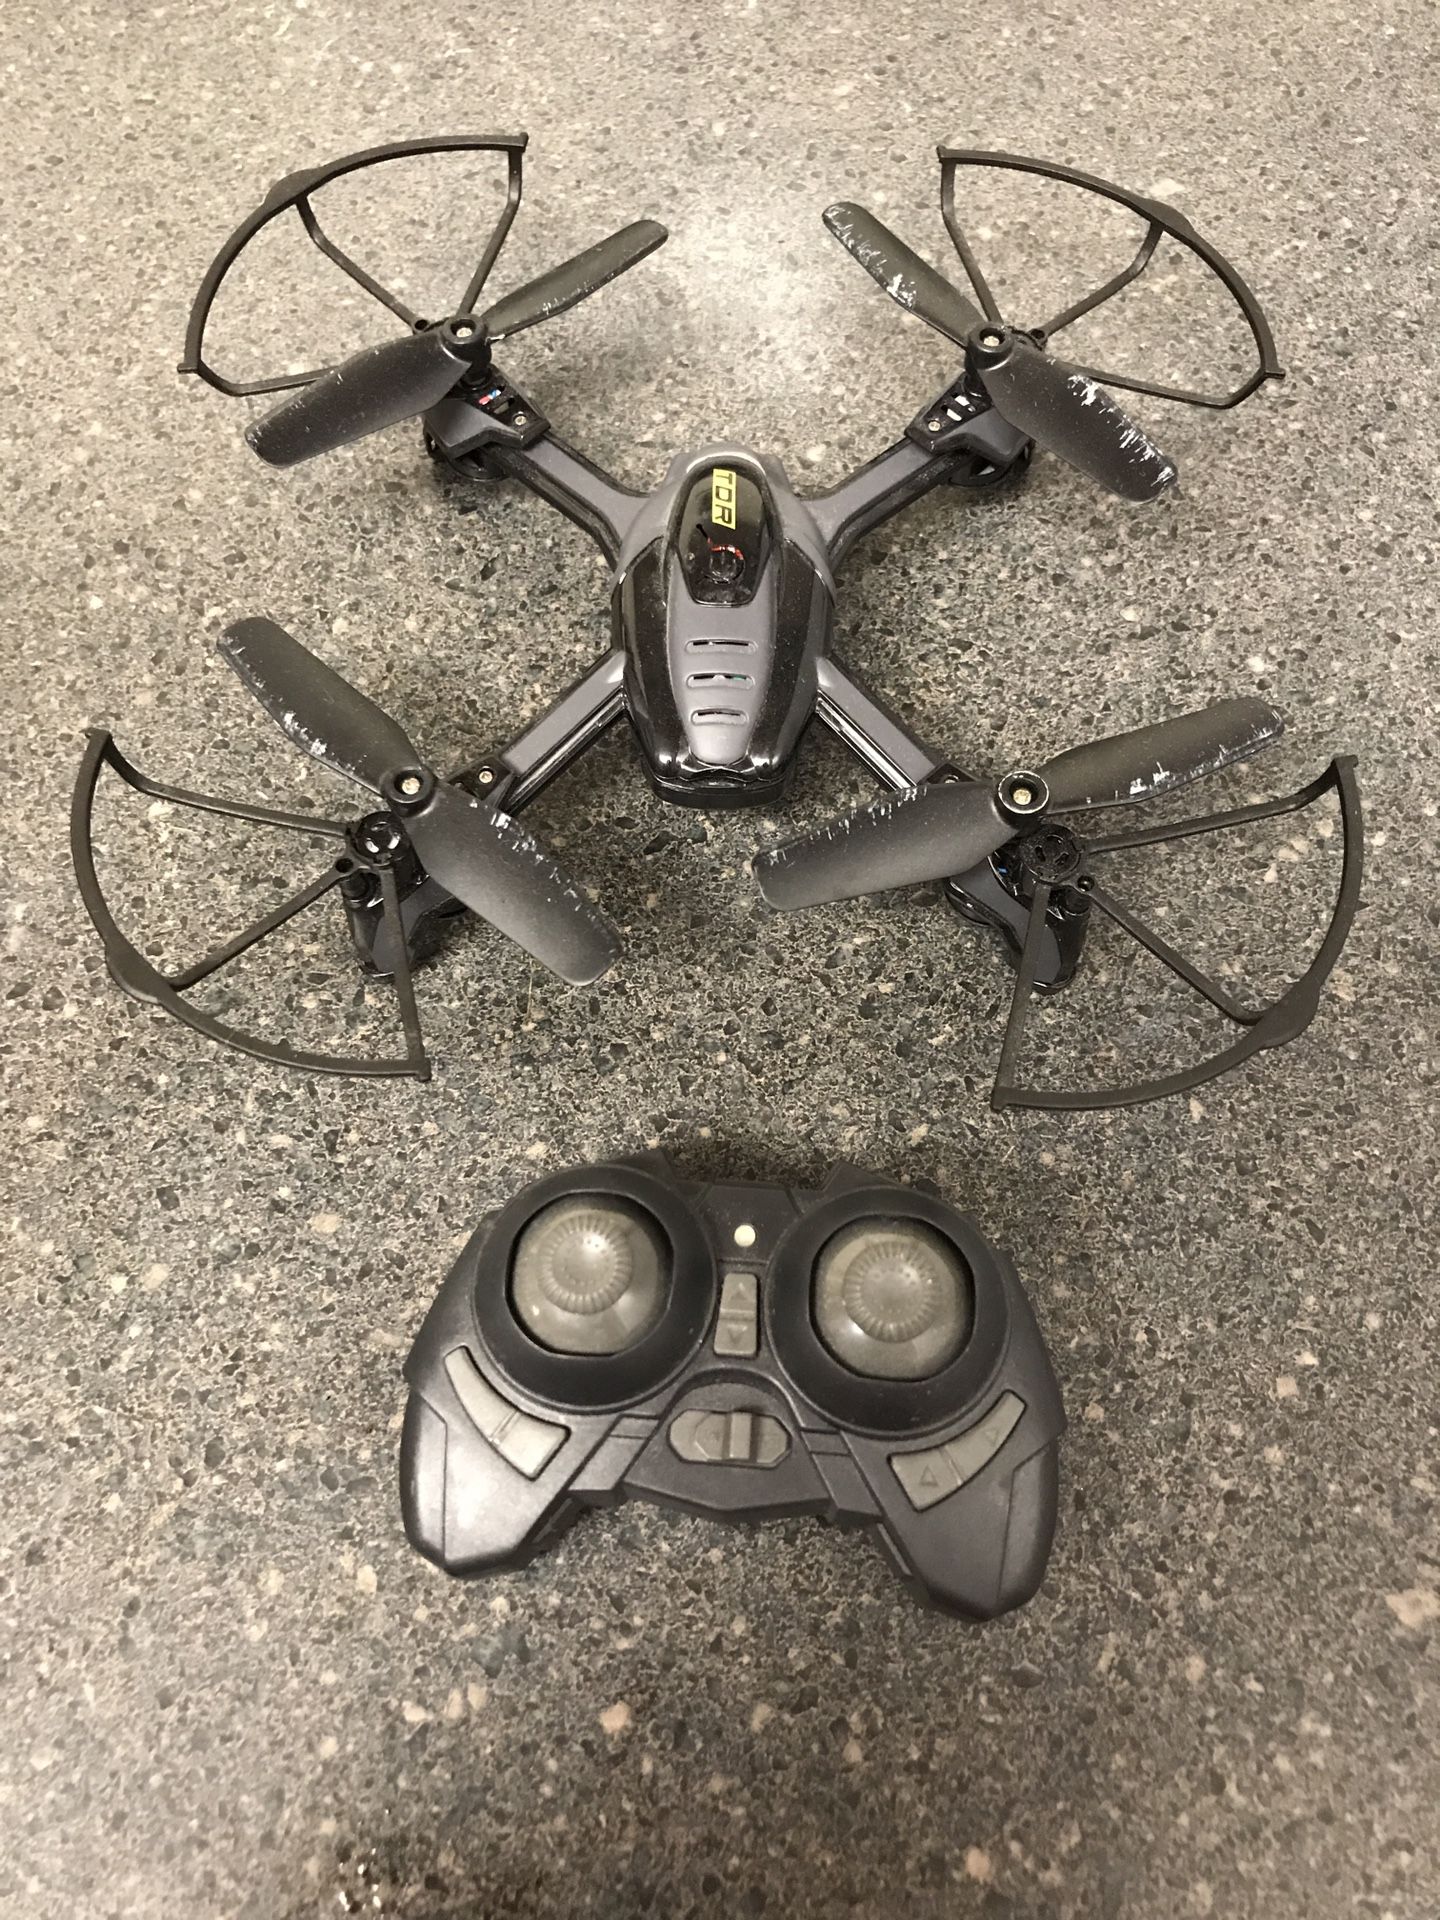 TDR drone with wifi camera